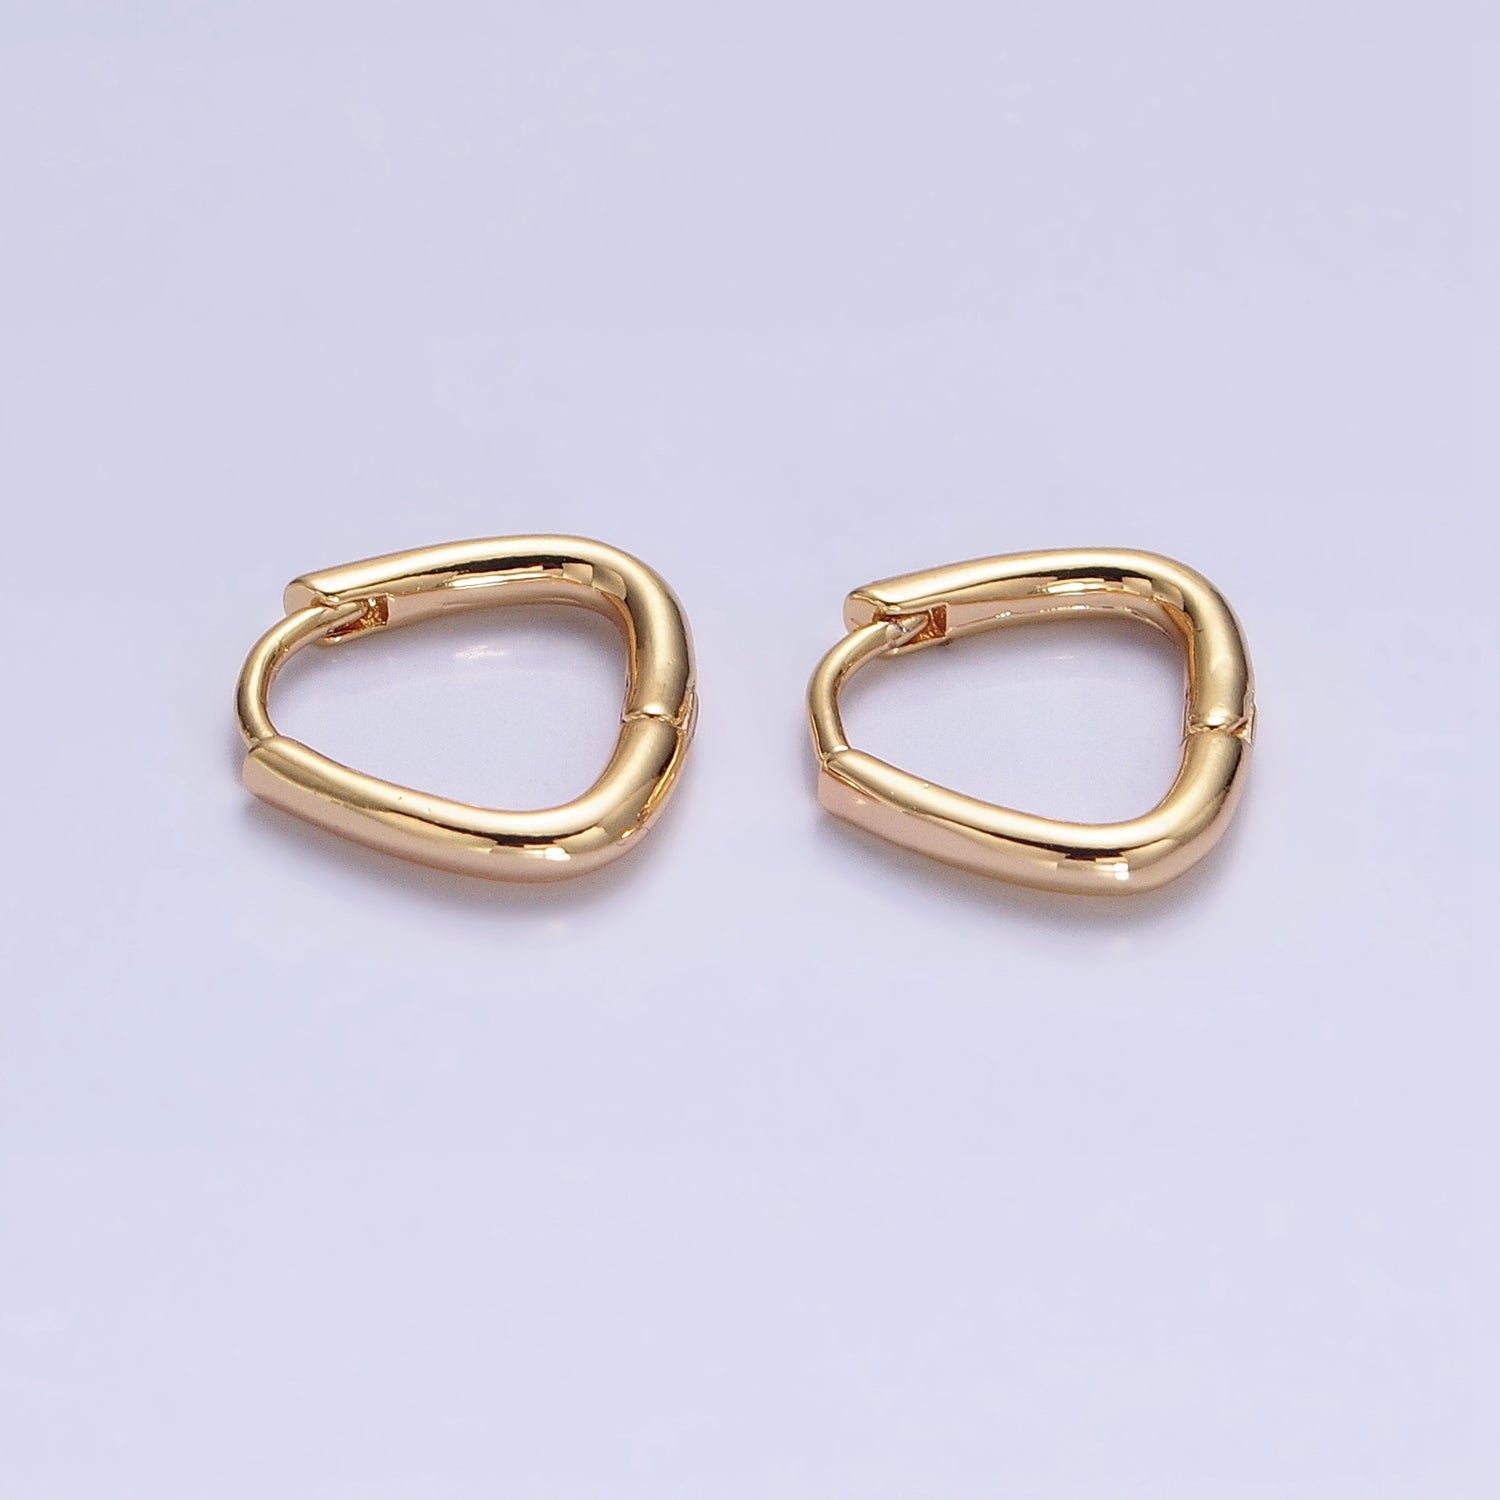 16K Gold Filled 11.5mm Triangle Minimalist Cartilage Huggie Earrings in Gold & Silver | AB825 AD823